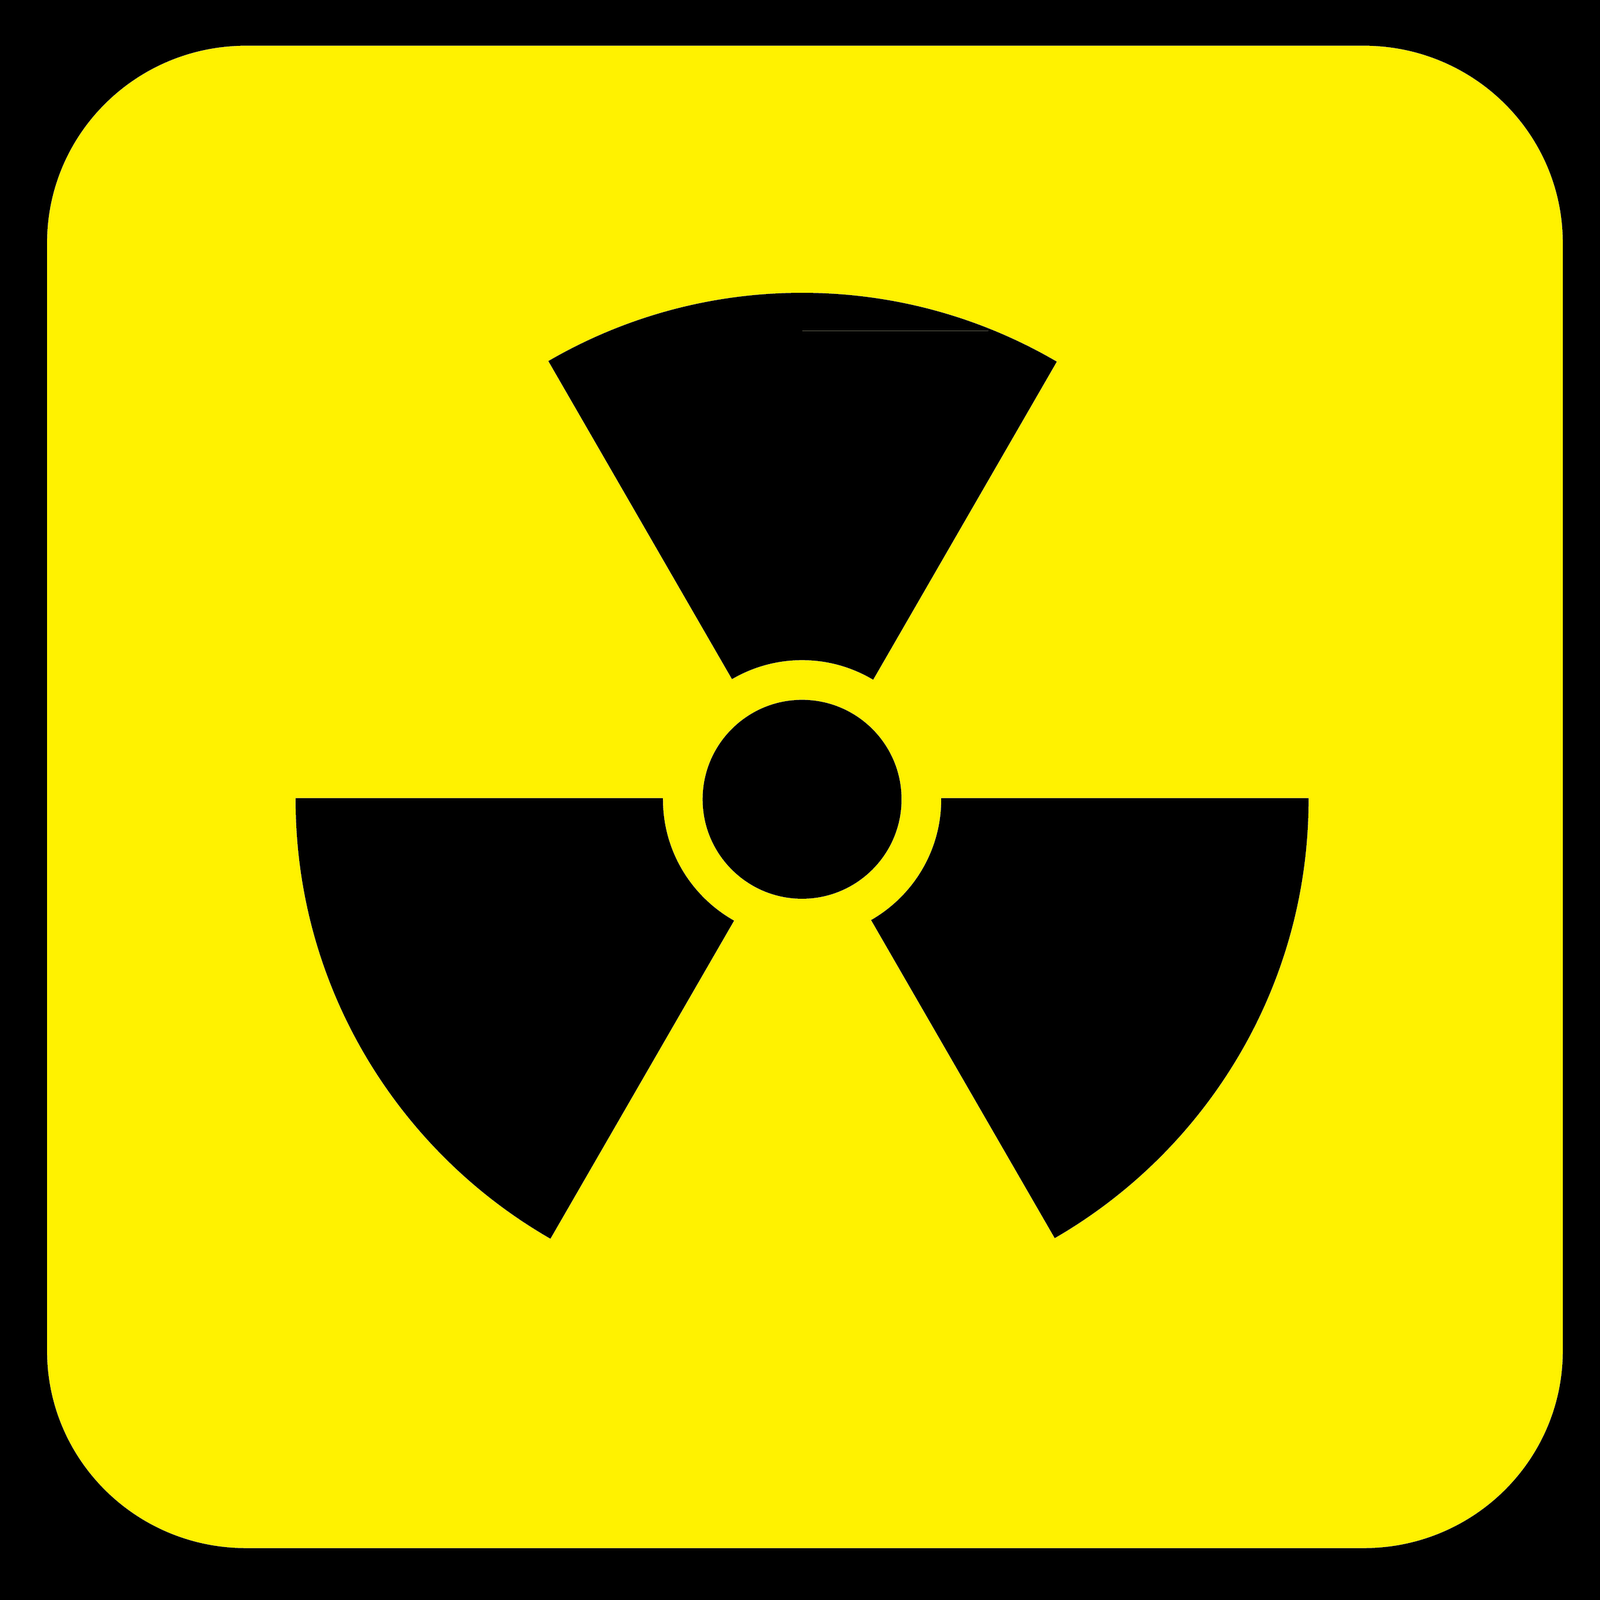 Logos For > Nuclear Energy Symbol Hd - ClipArt Best - ClipArt Best